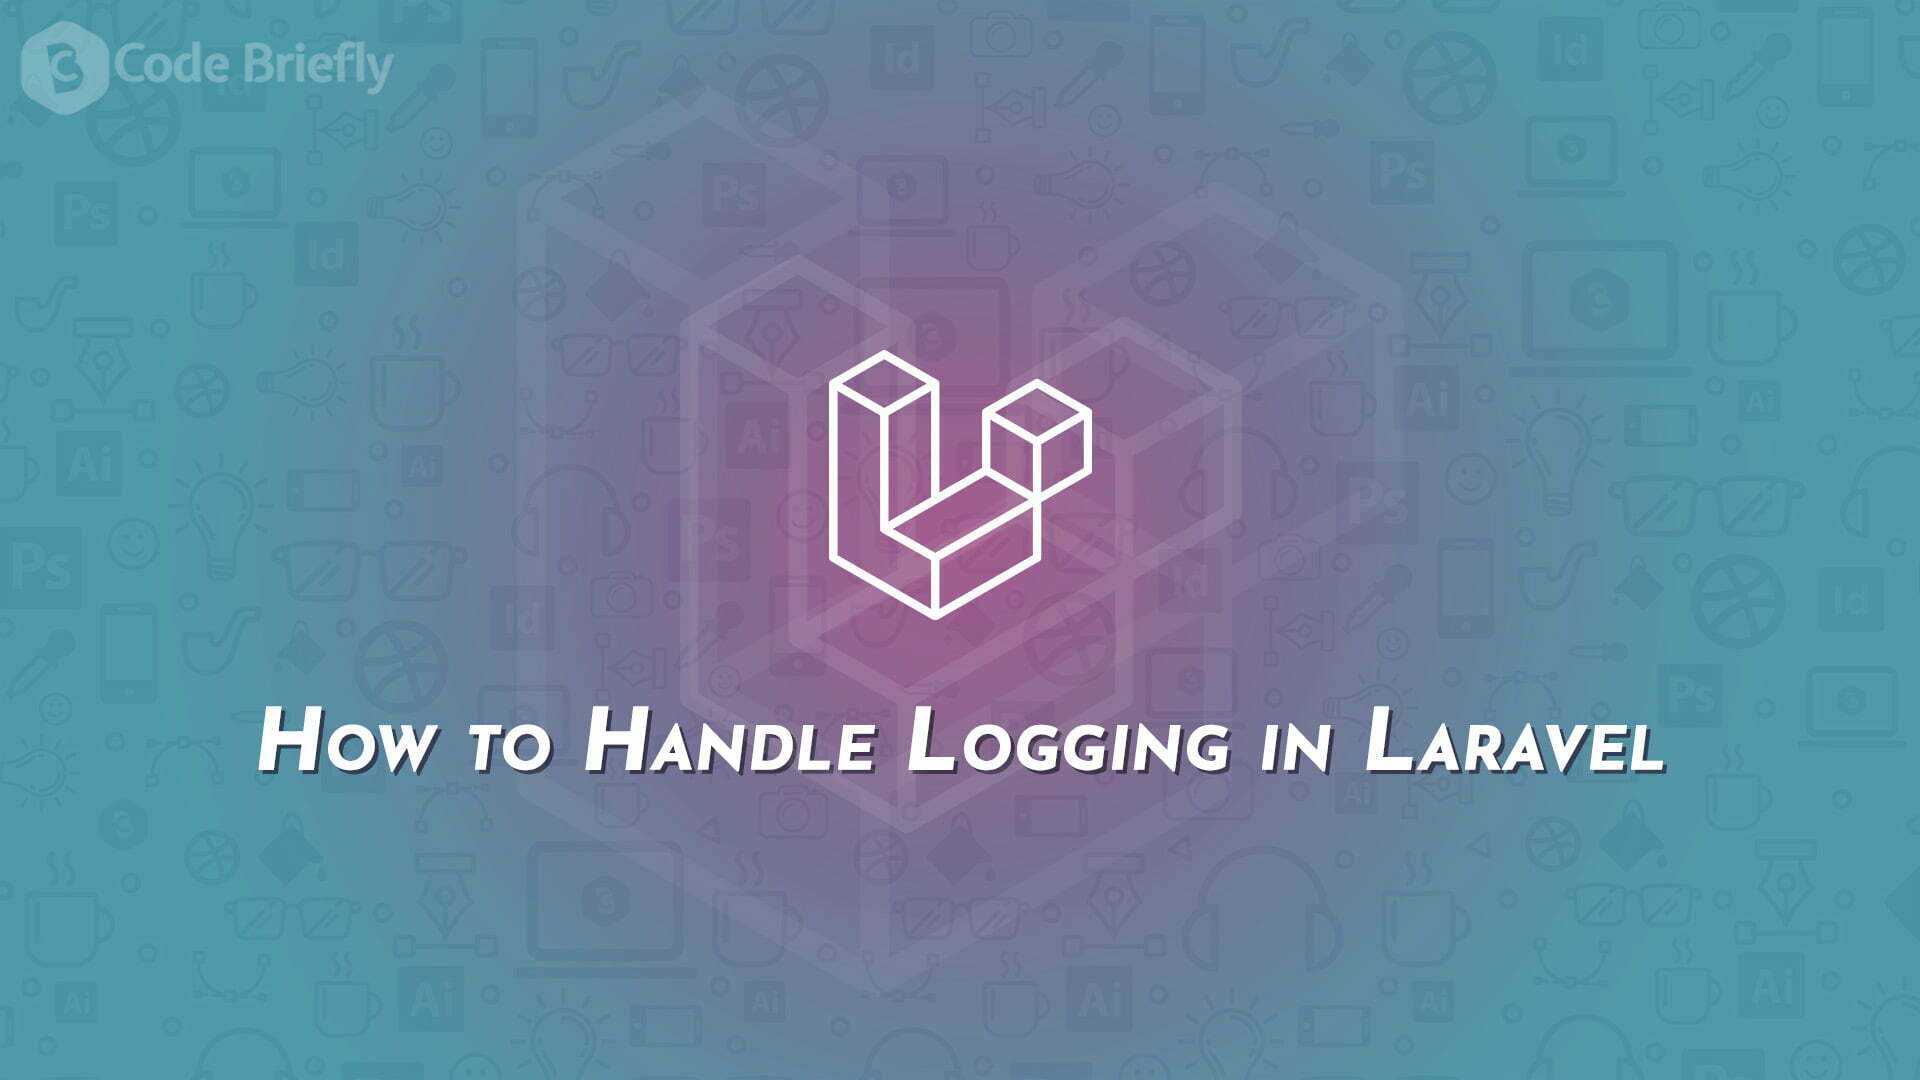 How to Handle Logging in Laravel